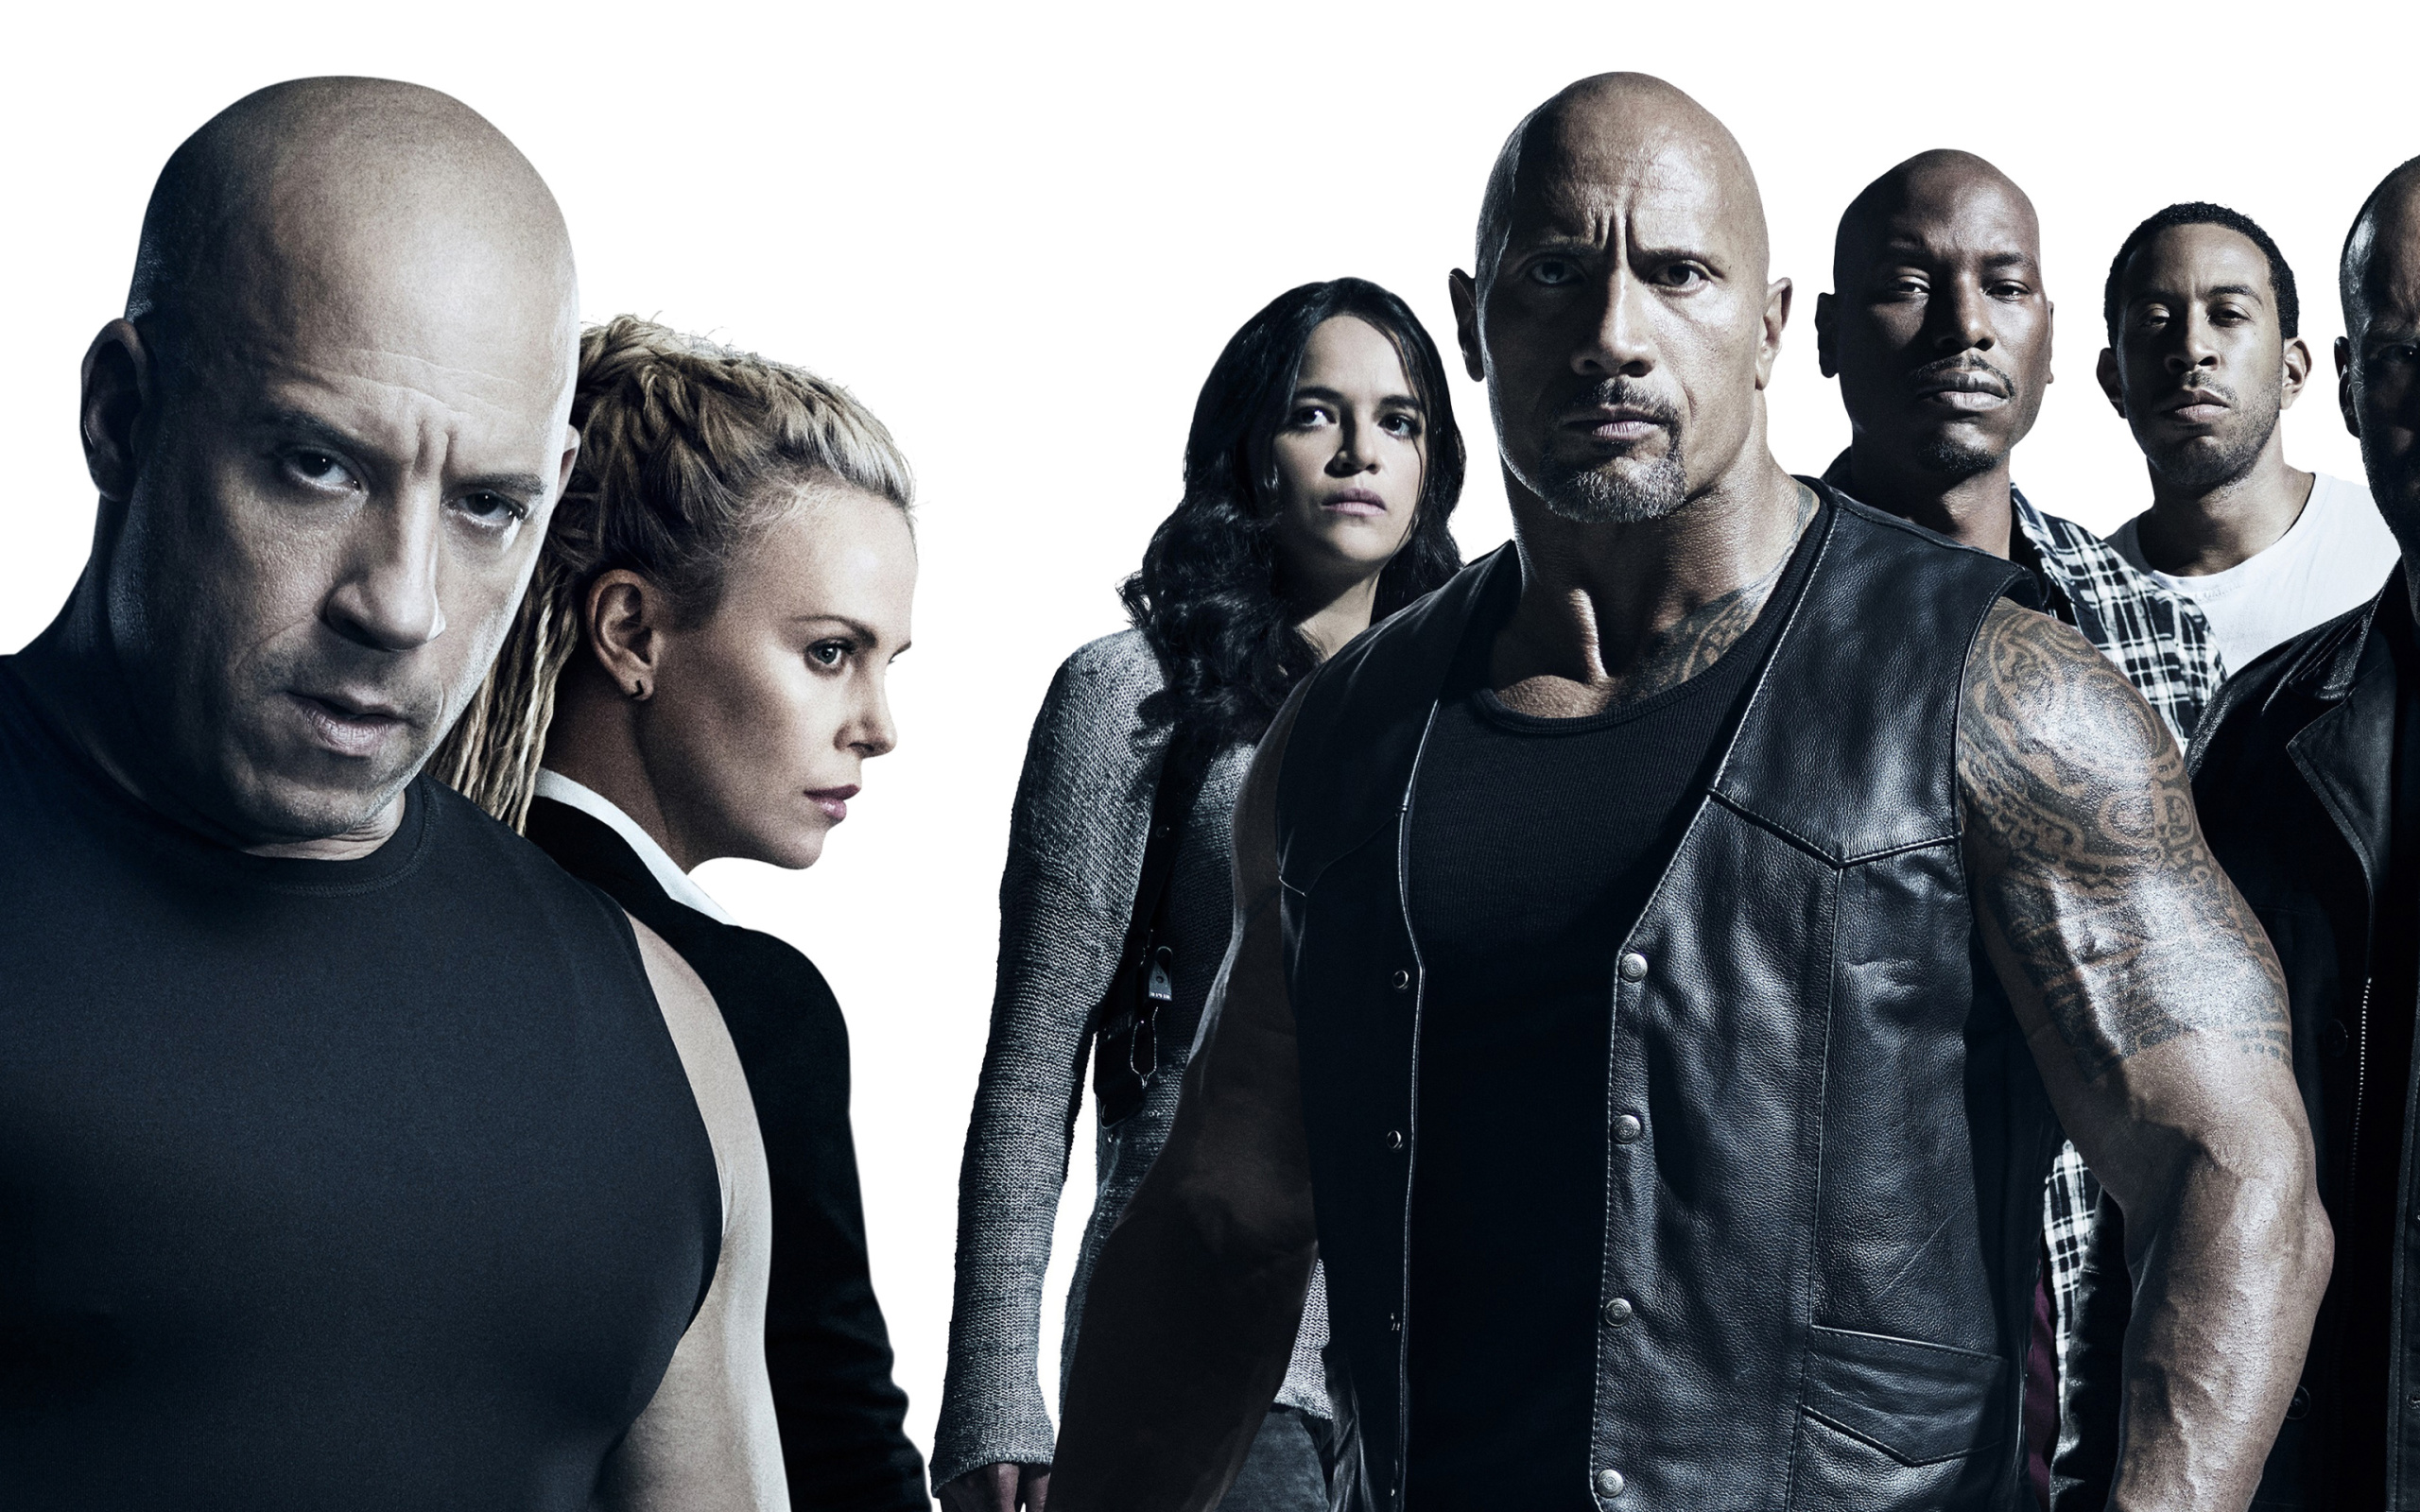 The Fate of the Furious Cast wallpaper 2560x1600